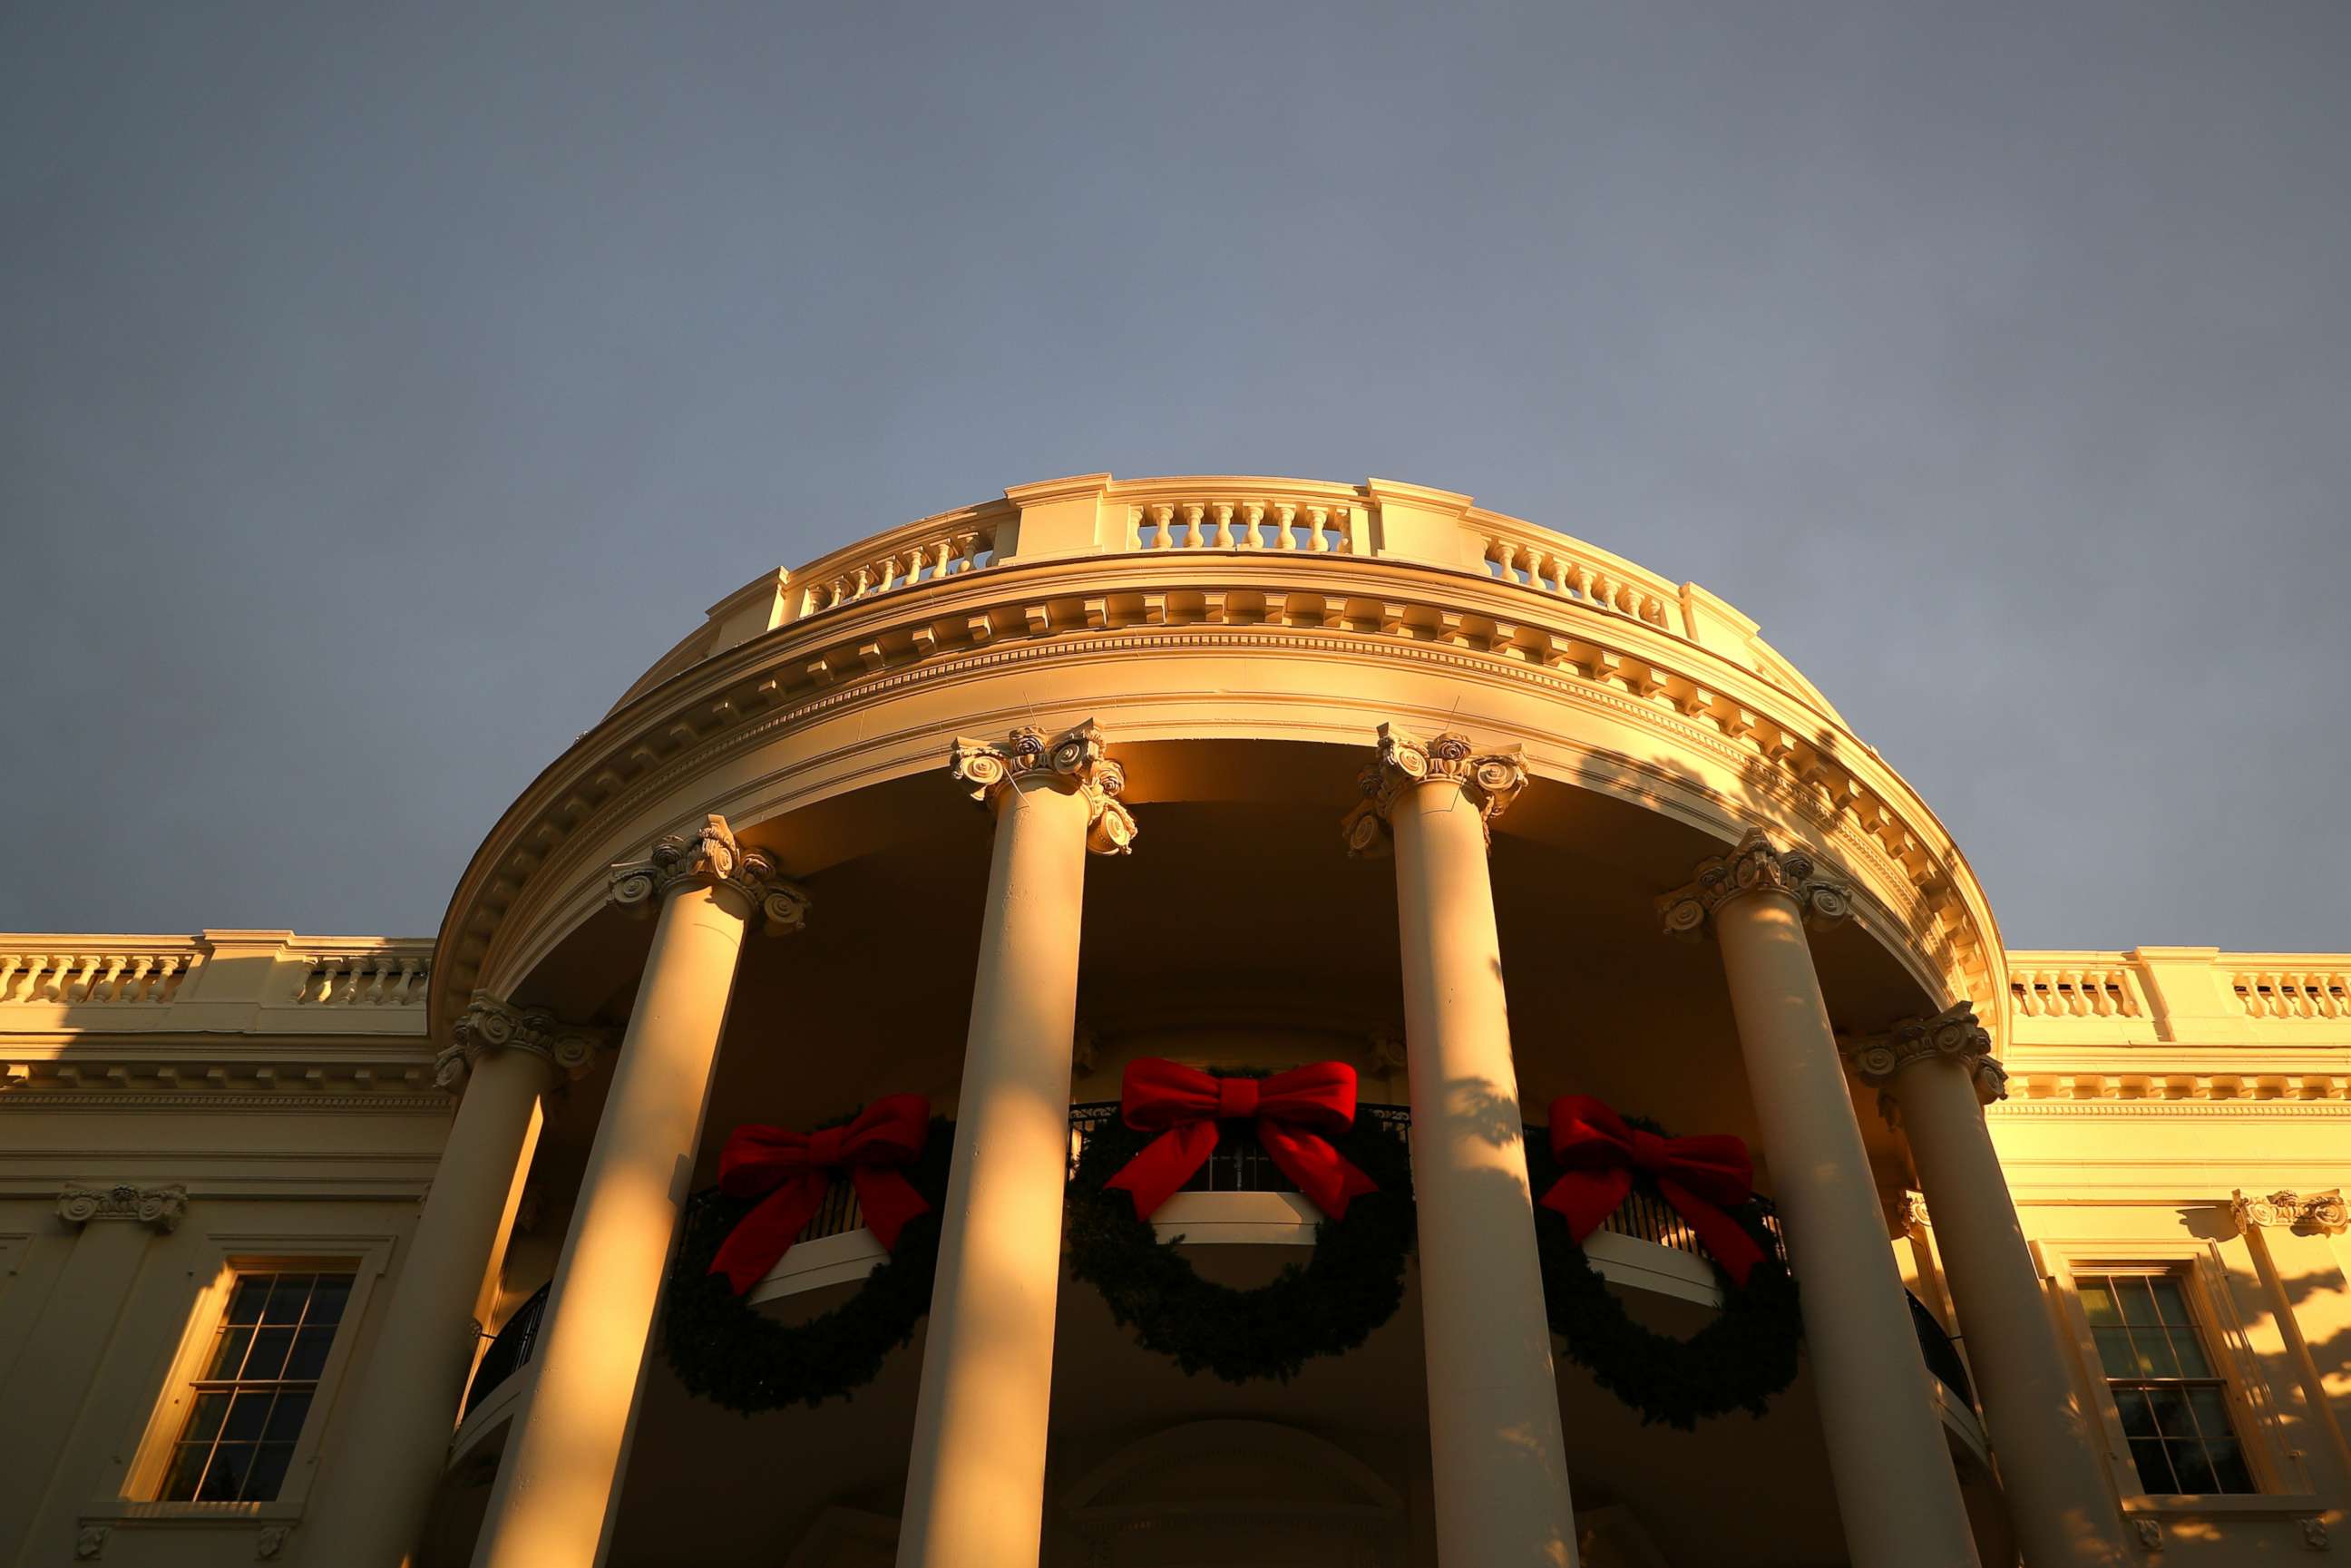 PHOTO: The White House is seen at sunrise, from the South Lawn Driveway, in Washington, U.S, December 7, 2021. REUTERS/Tom Brenner